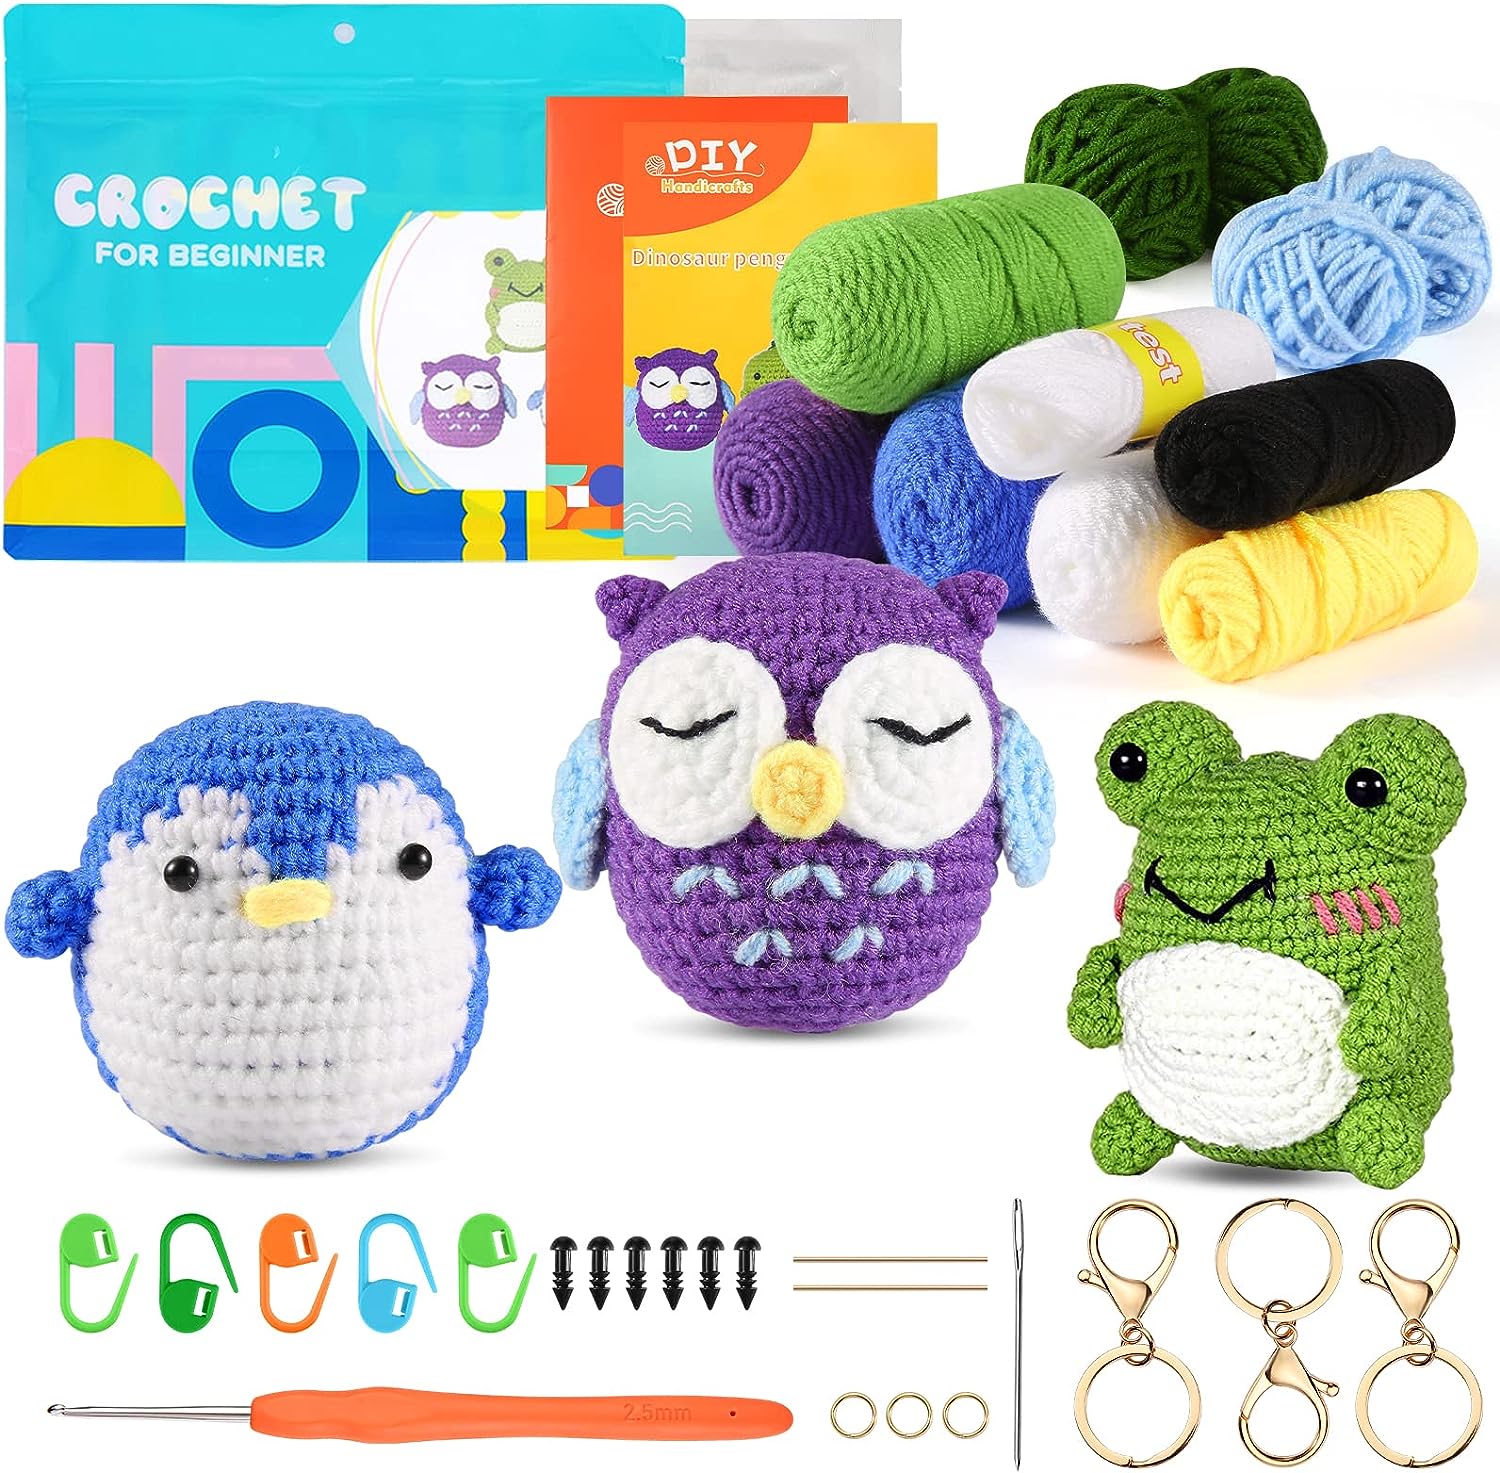 QSHQ Crochet Kit for Beginners, Crochet Starter Kit for Adults and Kids  Complete Knitting Kit to Make 3 PCS Animals, Learn to Crochet with  Step-by-Step Instruction and Video (Penguin+Frog+Owl) 